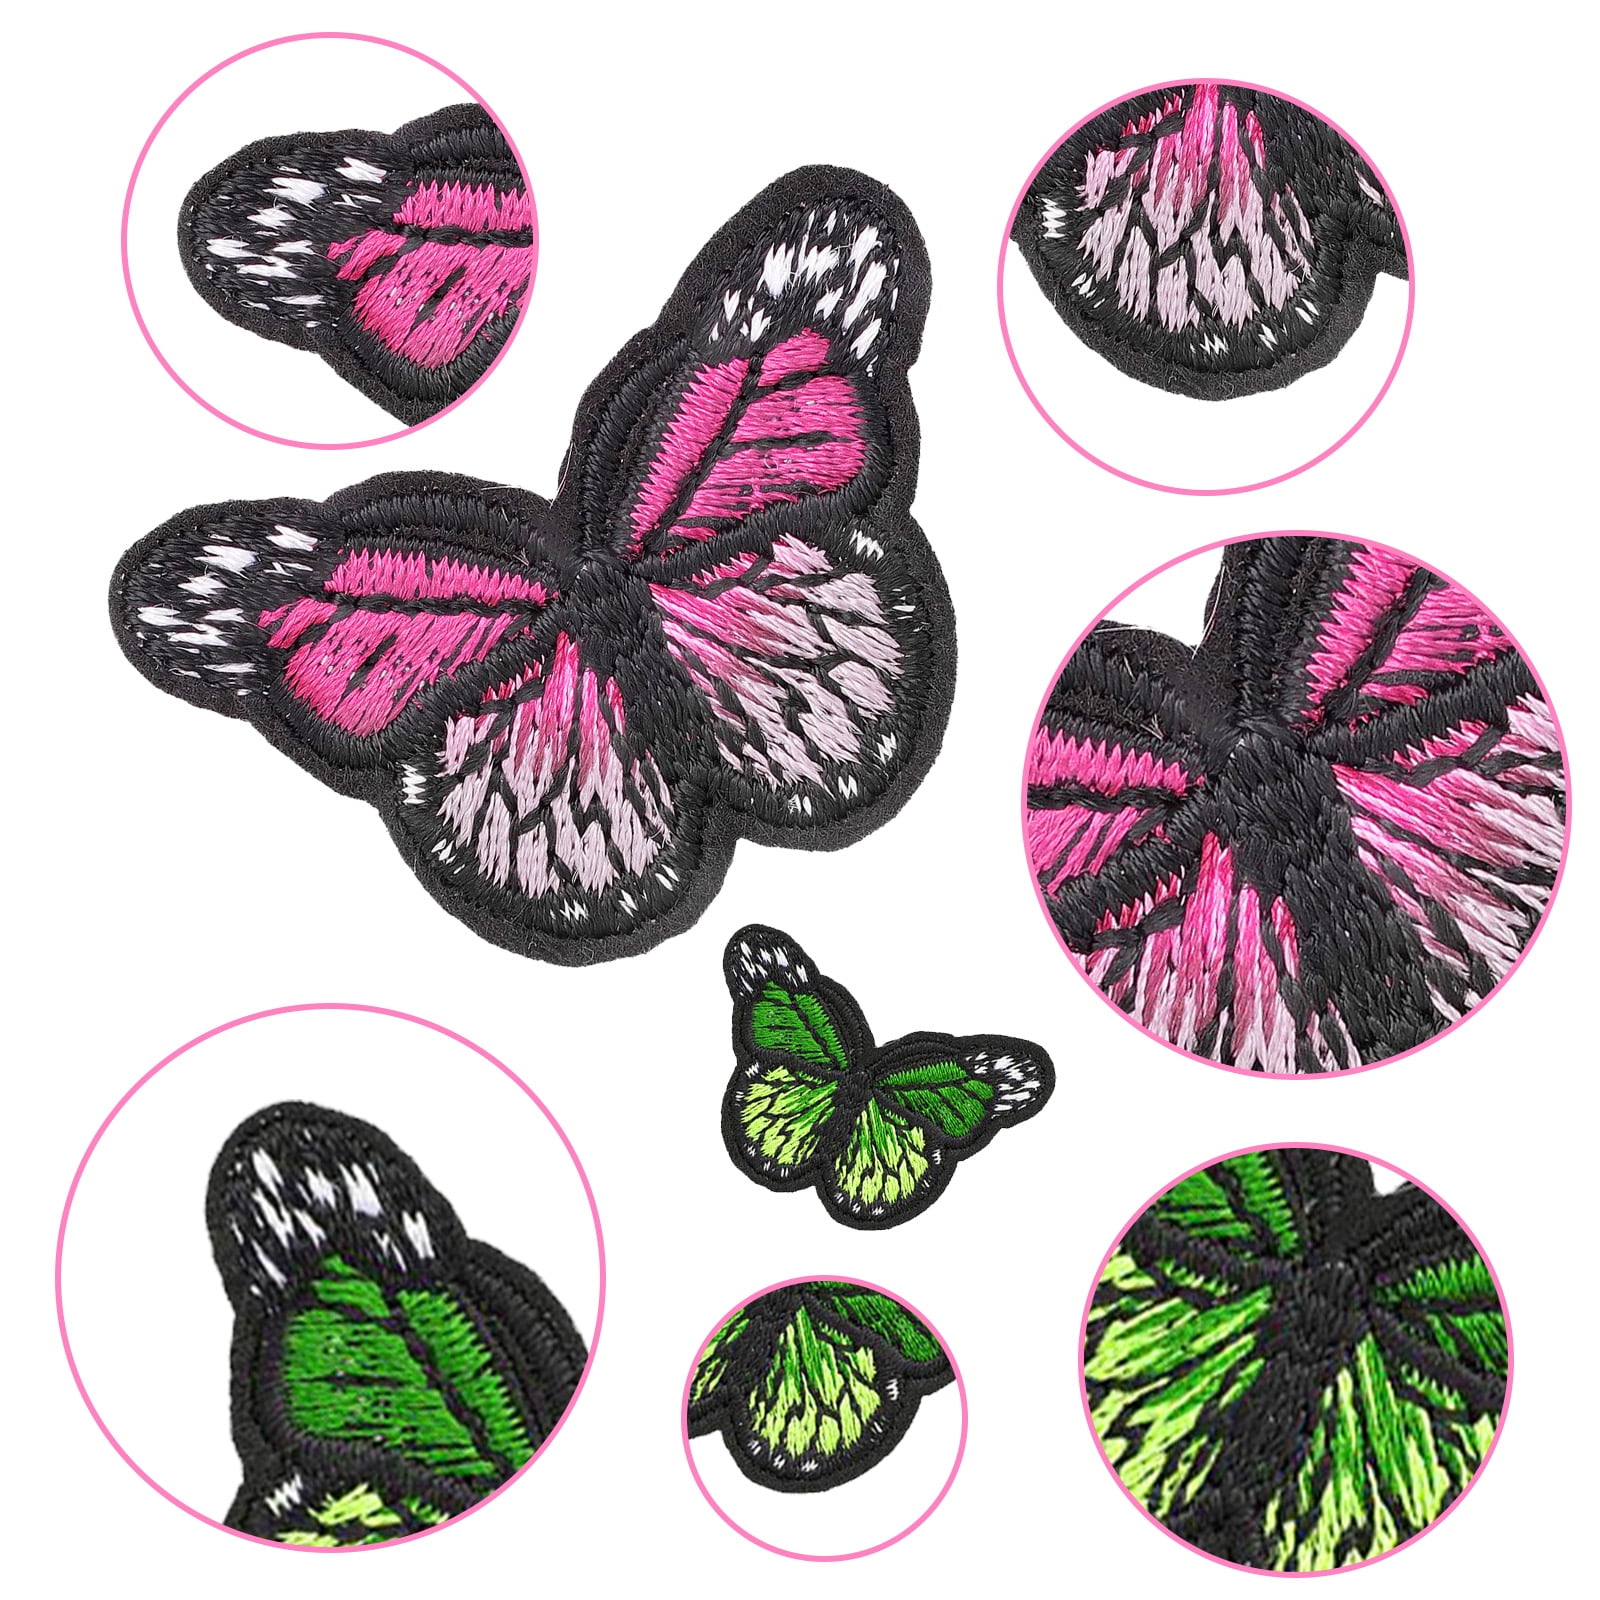 Butterfly Iron on Sew on Patches Iron on Sew on Full Embroidered Patch  Appliqués Badge Sewing Crafting Cards Journals Scrapbooks 5 Pcs 